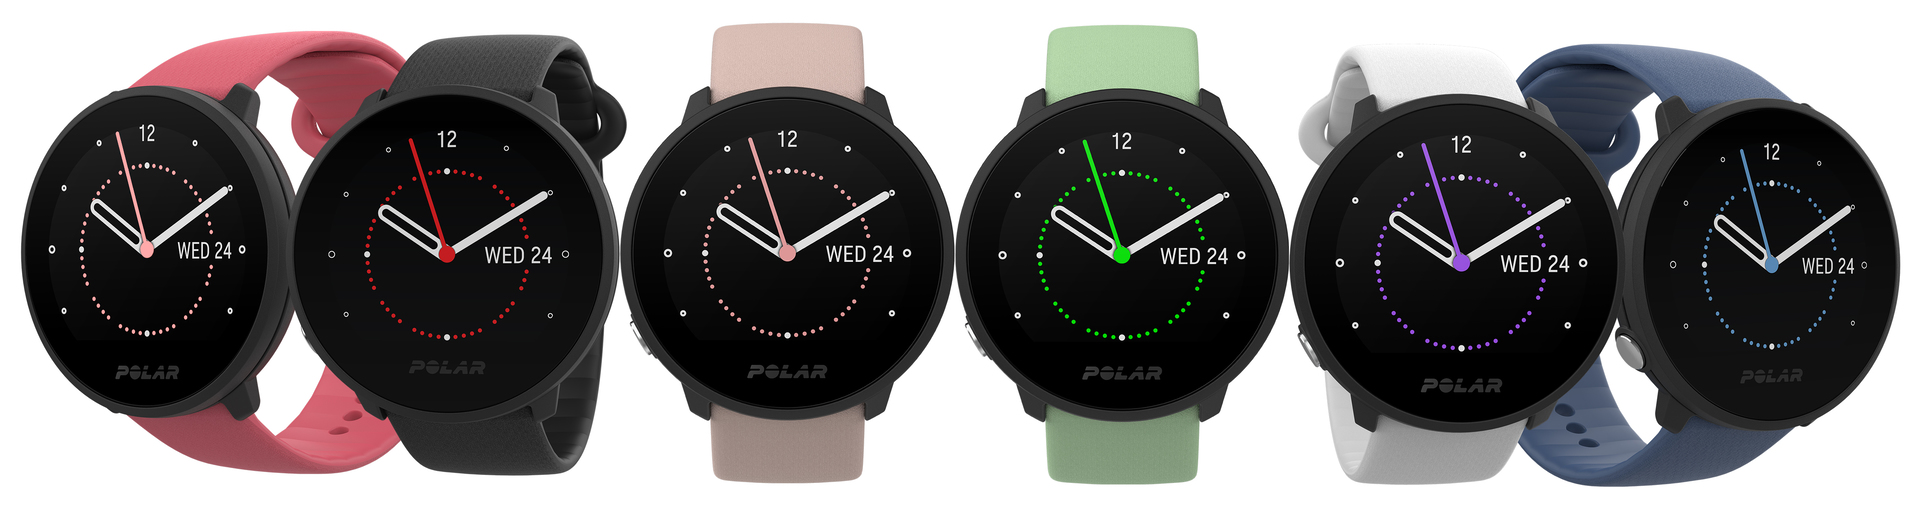 polar unite fitness watch all colors